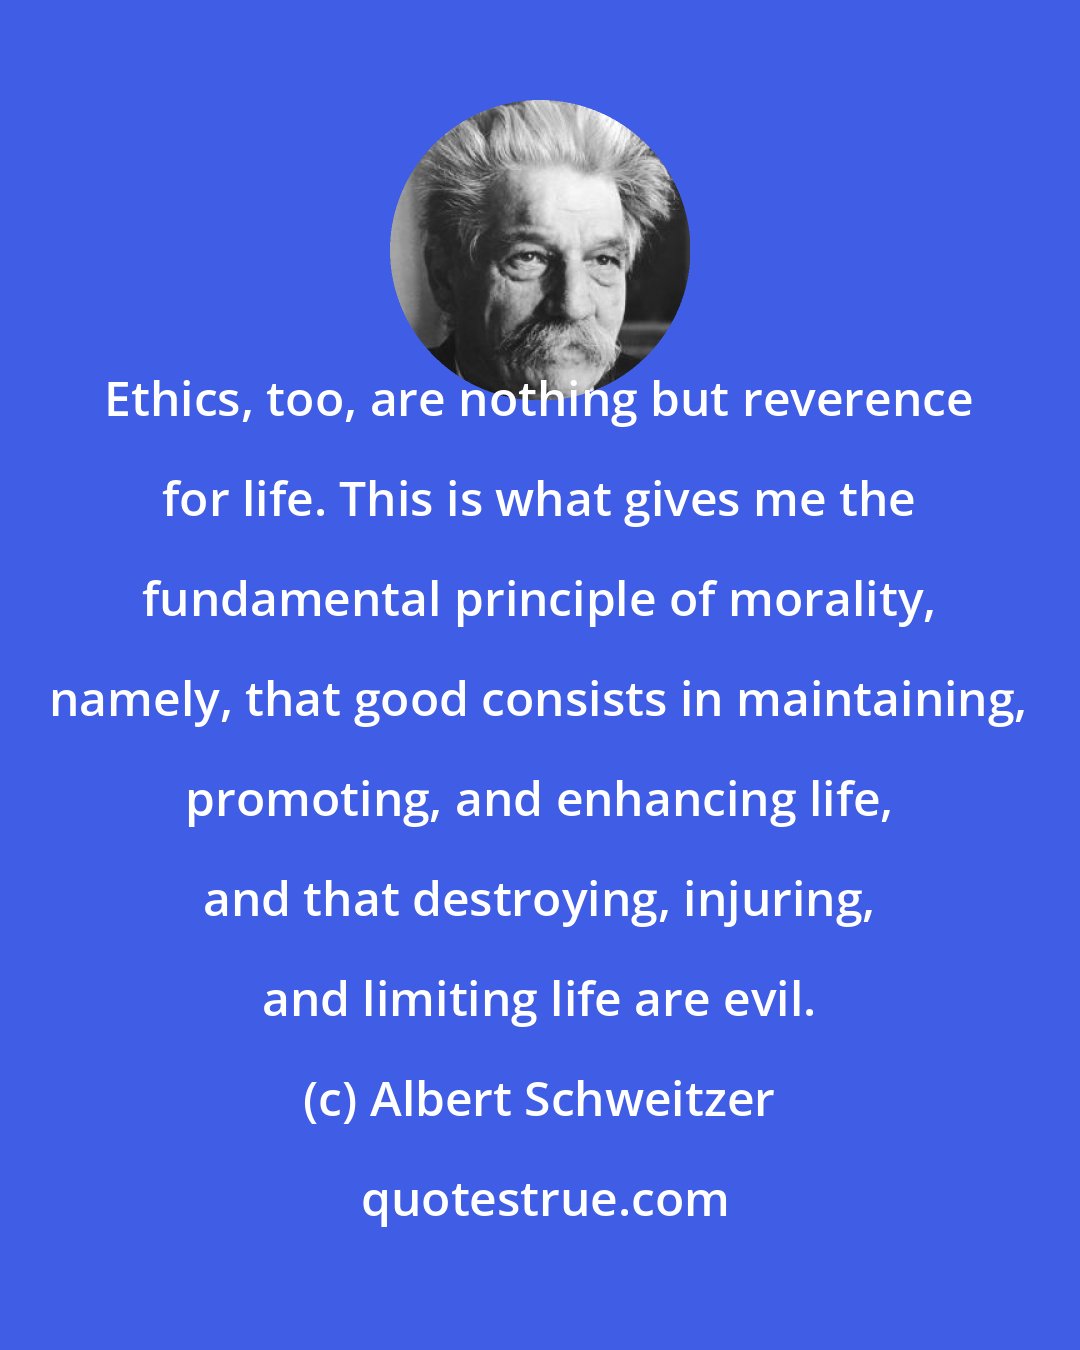 Albert Schweitzer: Ethics, too, are nothing but reverence for life. This is what gives me the fundamental principle of morality, namely, that good consists in maintaining, promoting, and enhancing life, and that destroying, injuring, and limiting life are evil.